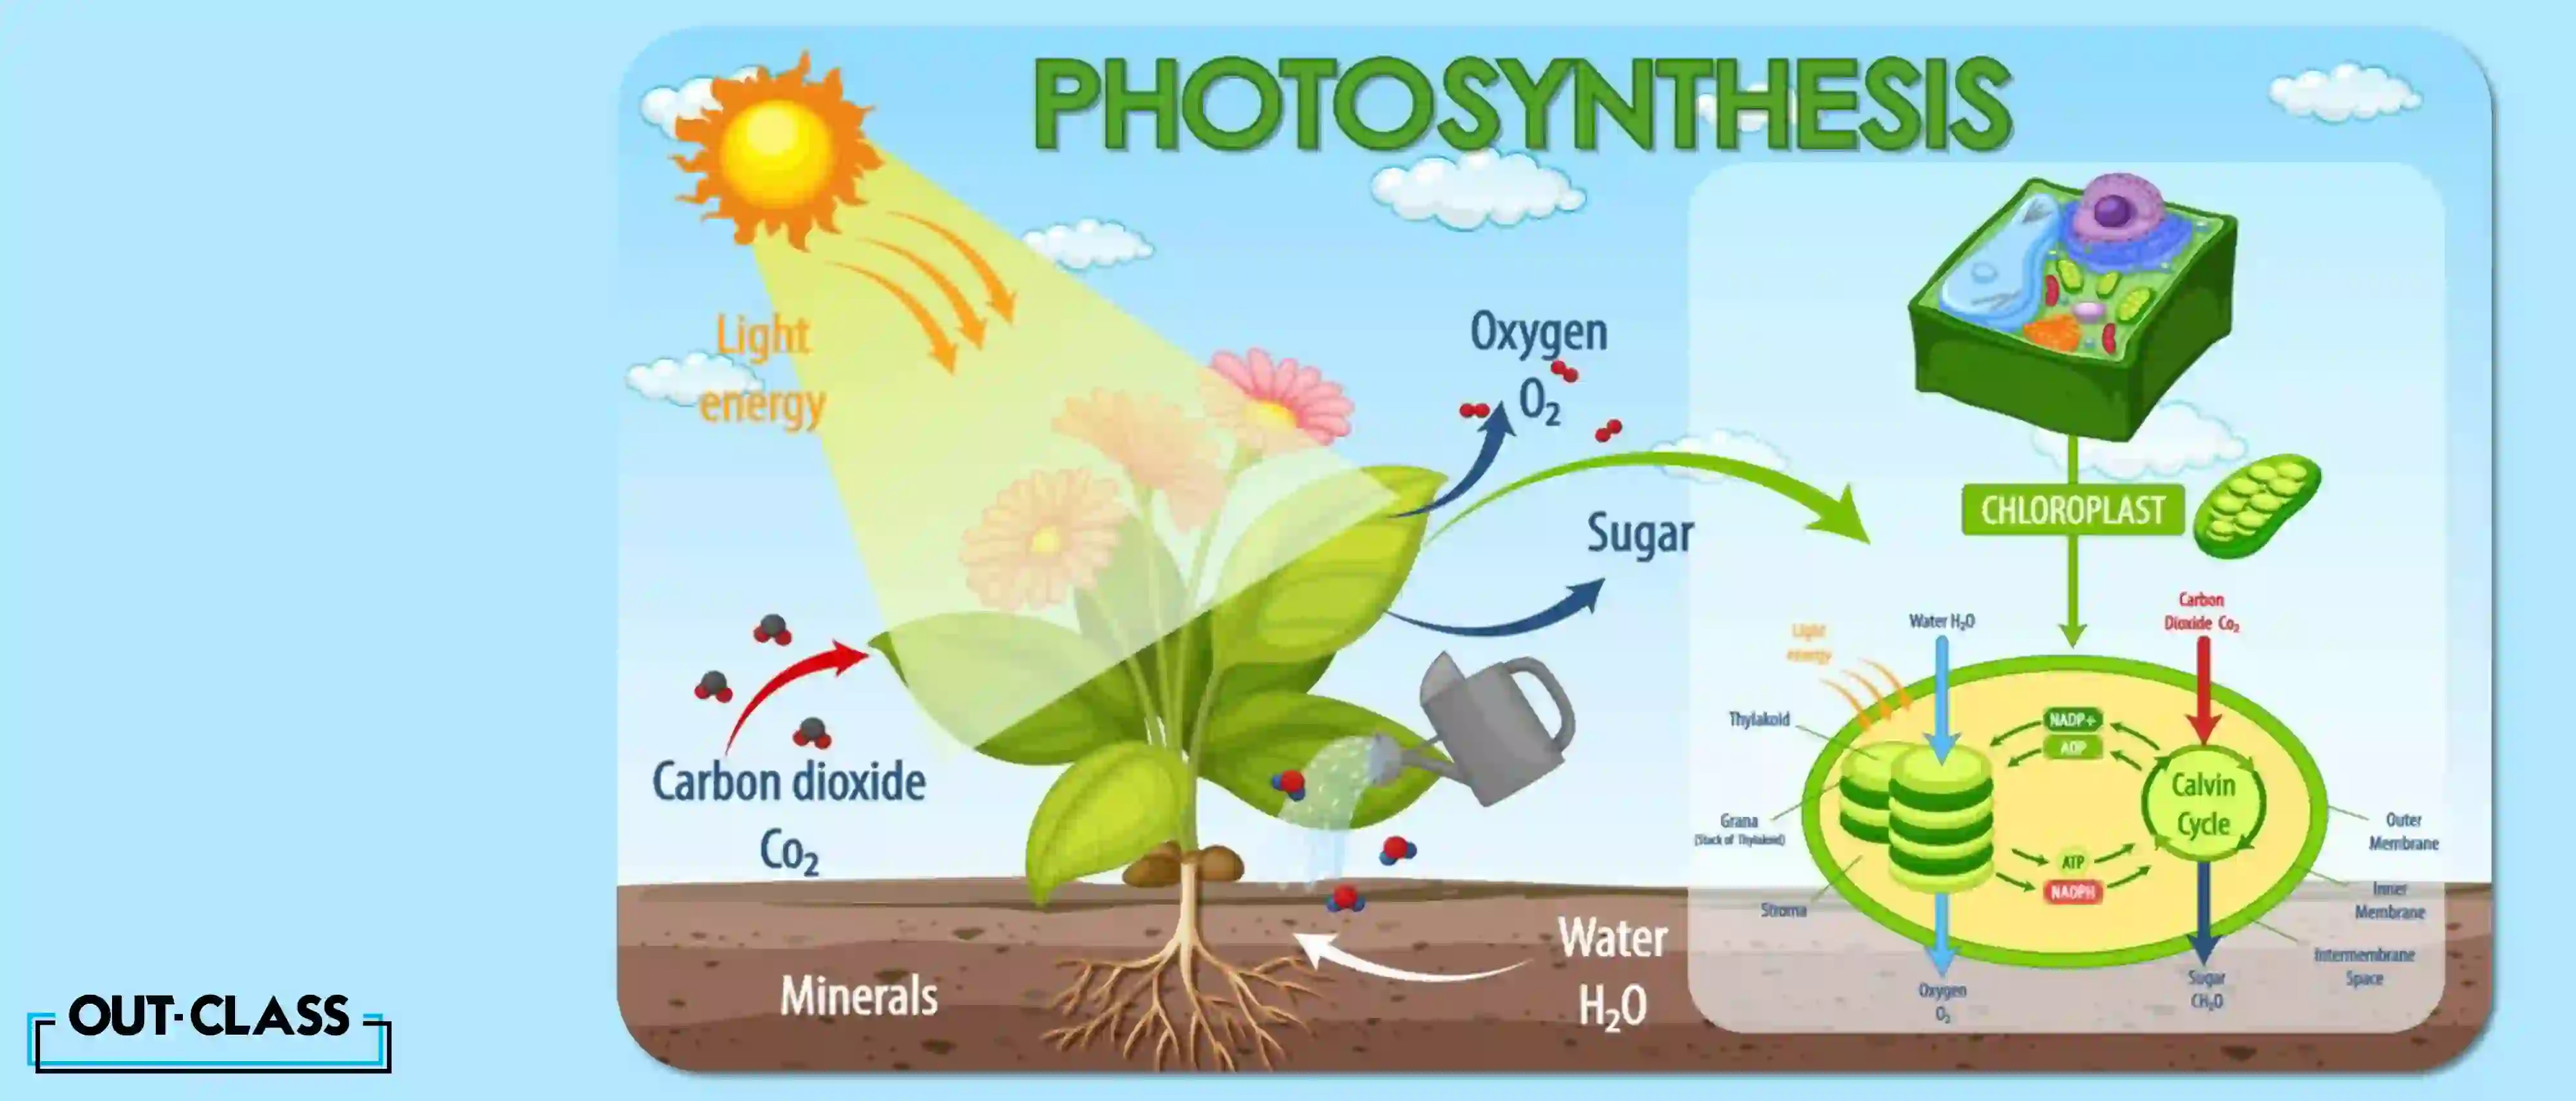 It’s the process by which plants synthesise carbohydrates from raw materials by harnessing light energy. The chloroplast contains a green pigment called chlorophyll that captures light energy and converts it into chemical energy. This process initiates the synthesis of glucose and releases oxygen as a by-product.